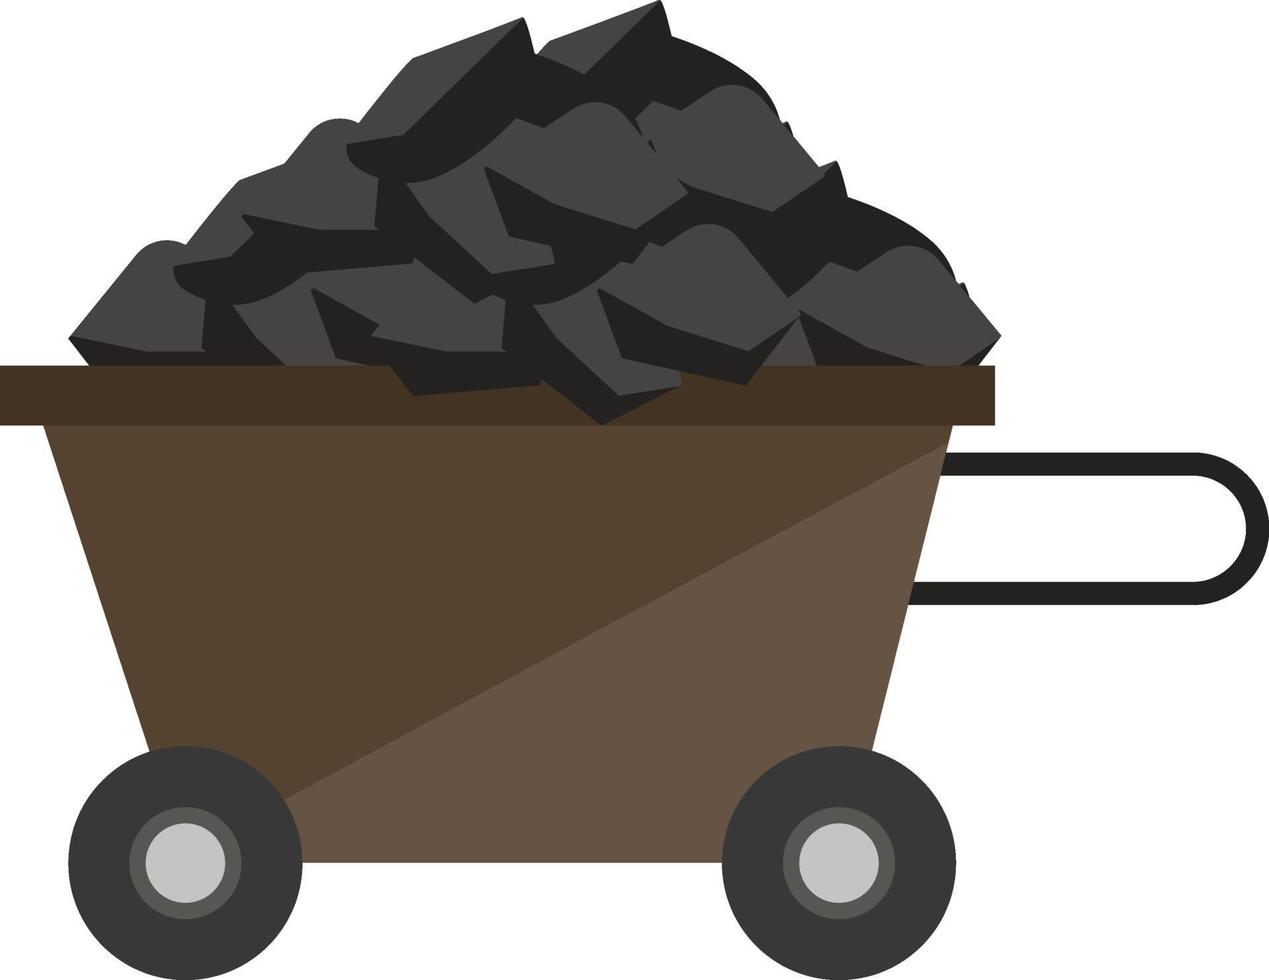 Coal trolley, illustration, vector on a white background.